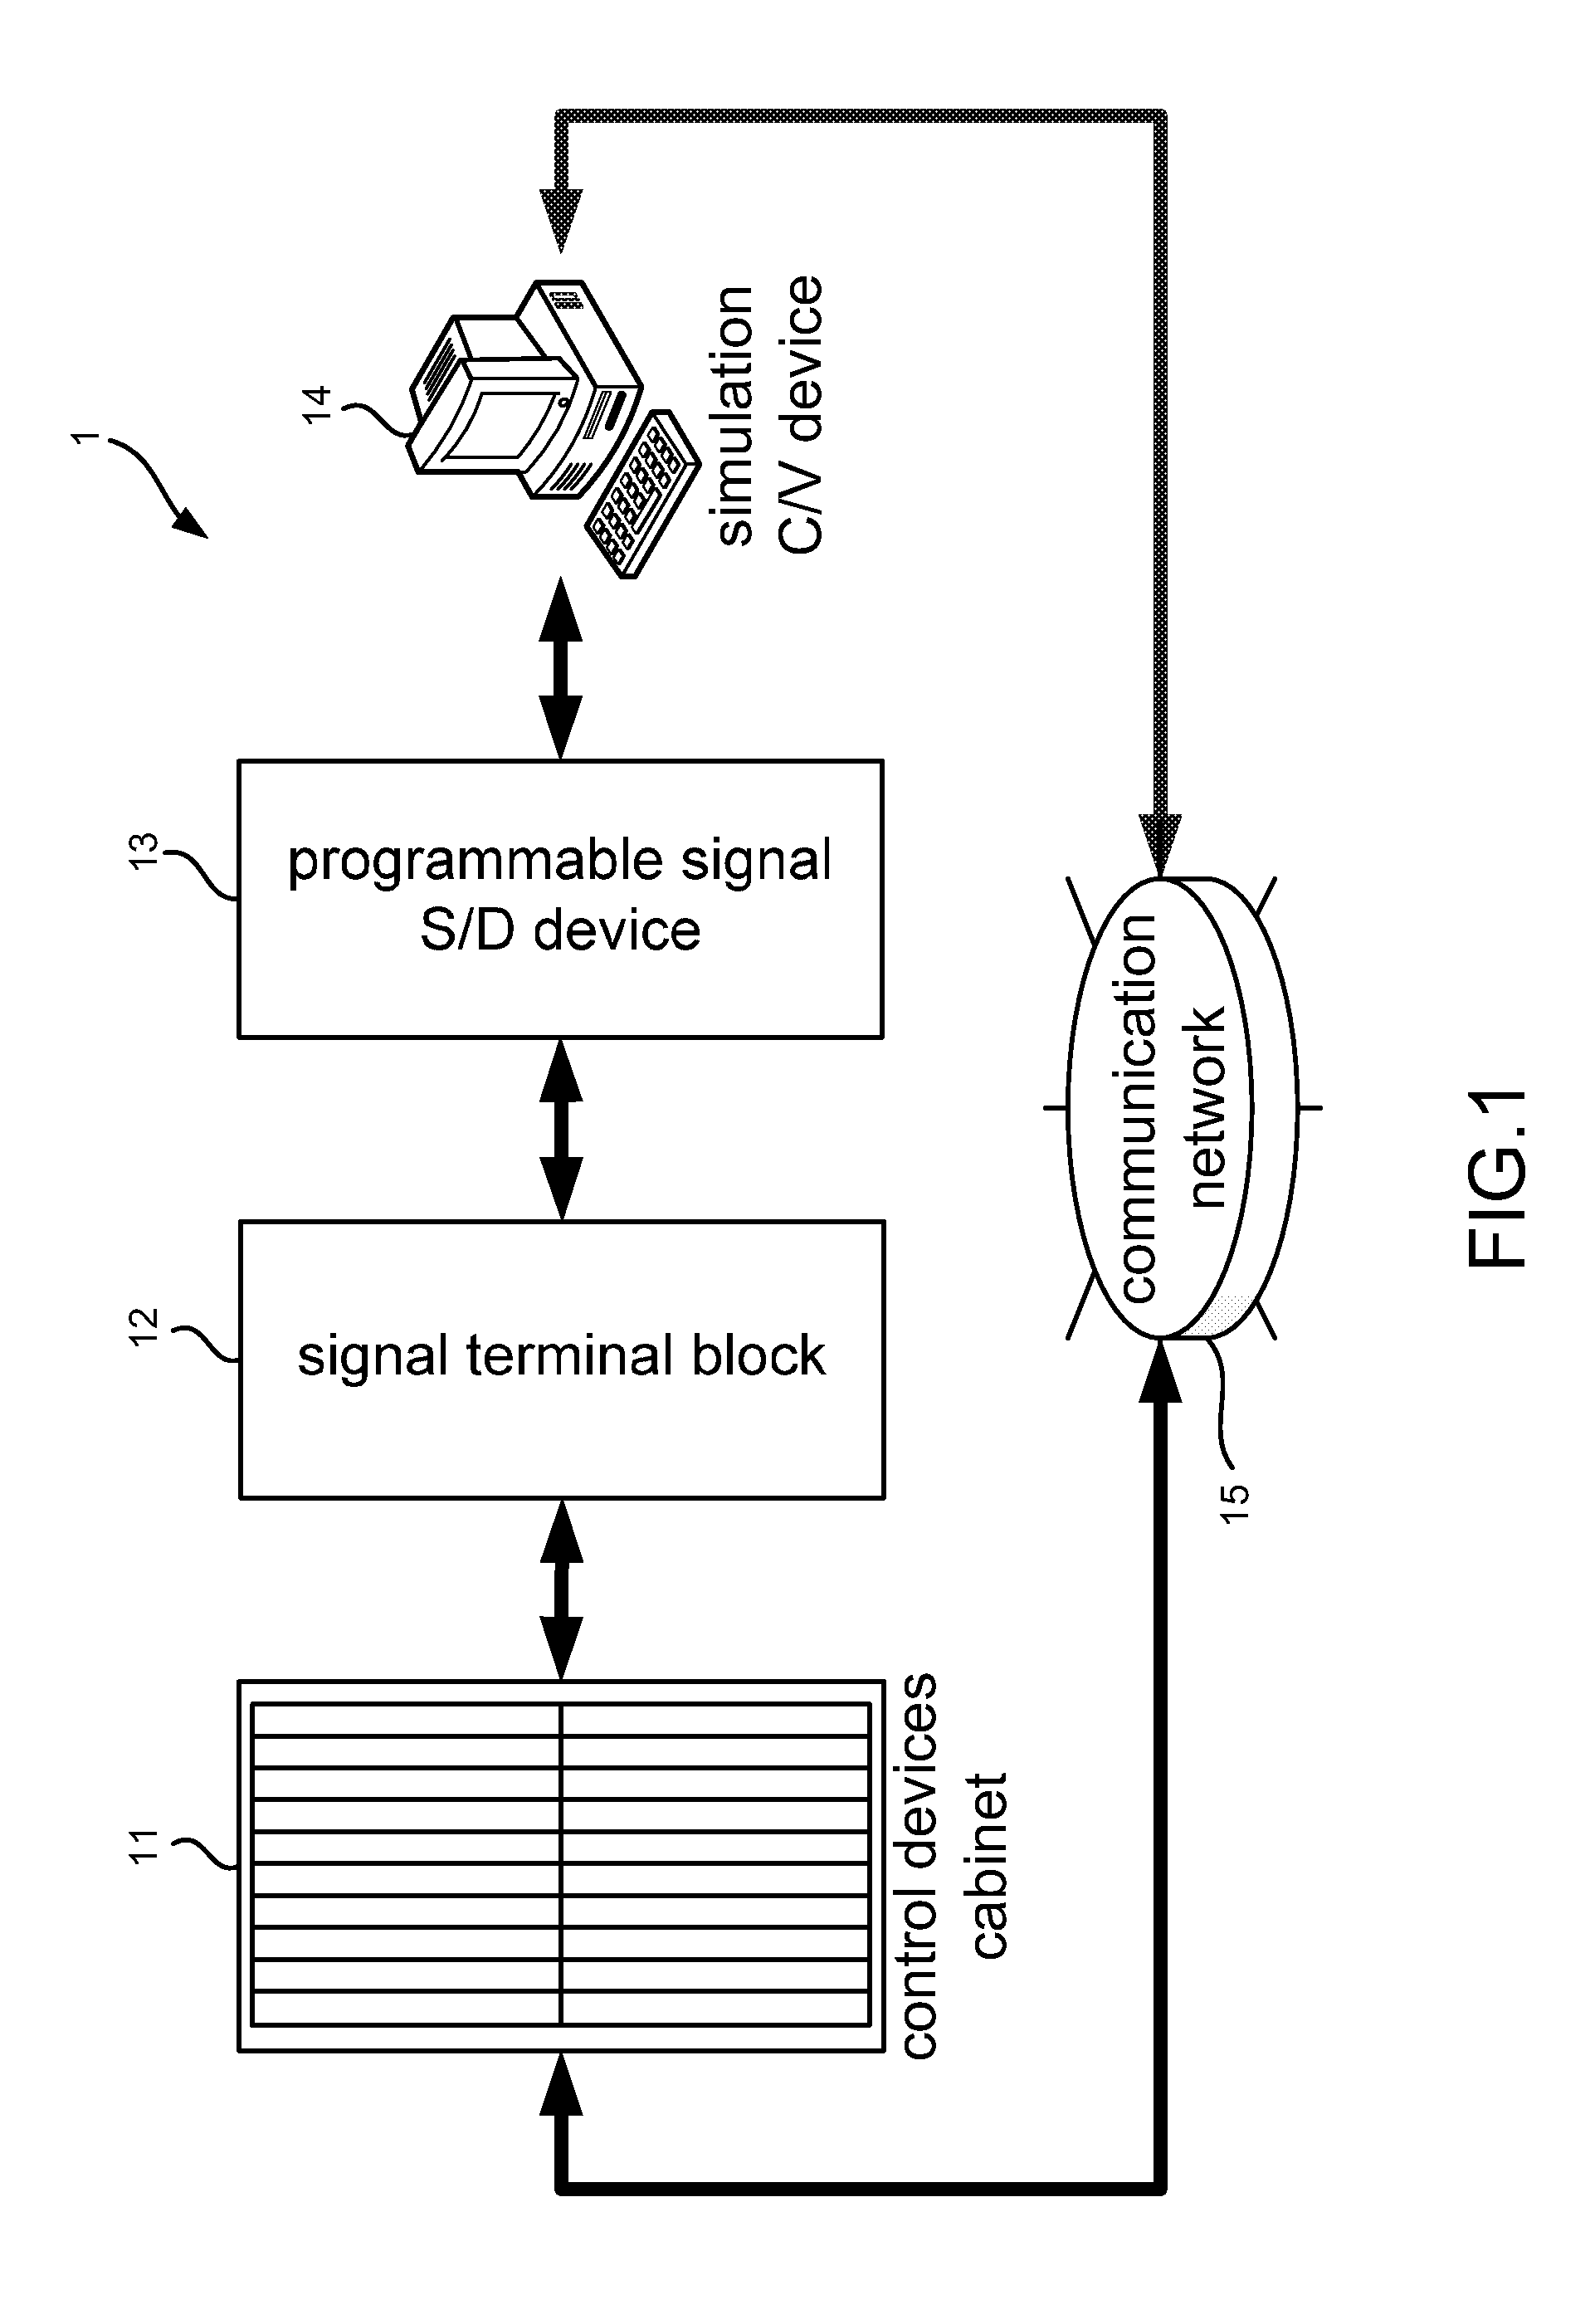 System of Testing Engineered Safety Feature Instruments